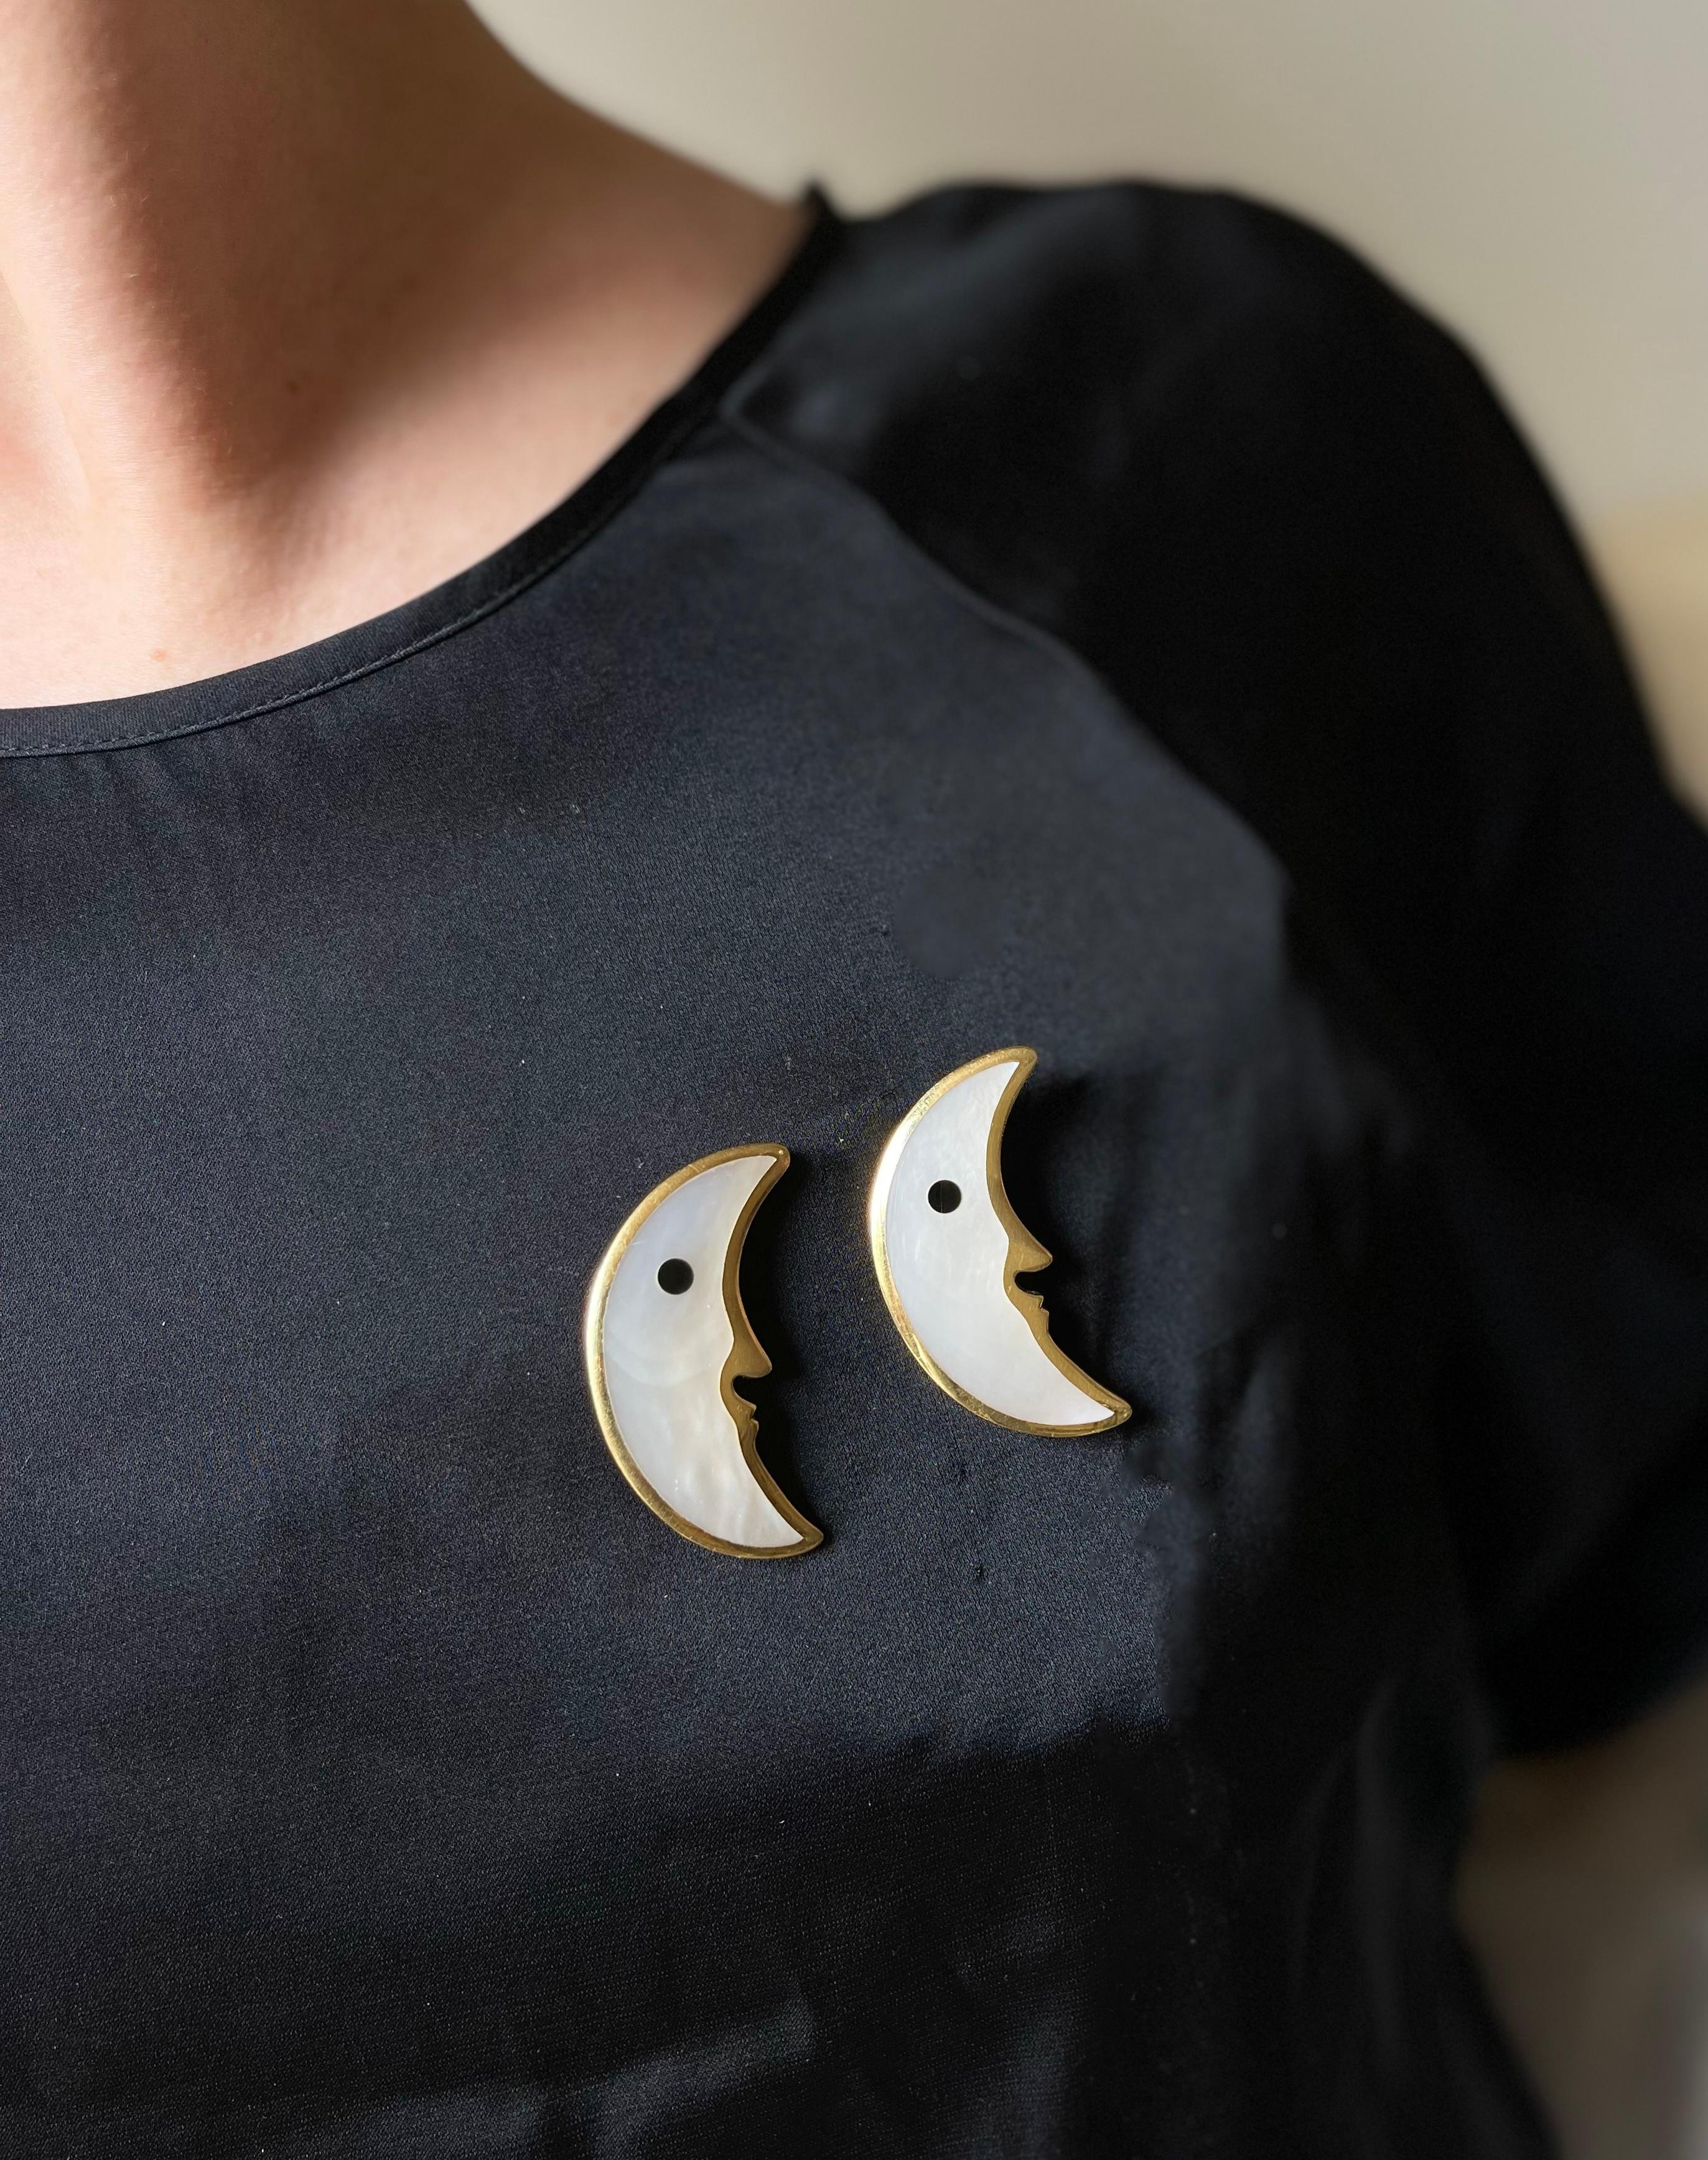 Set of two 18k gold half moon brooches by Tiffany & Co, crafted with mother of pearl inlay and onyx eyes. Each brooch measures 1.75